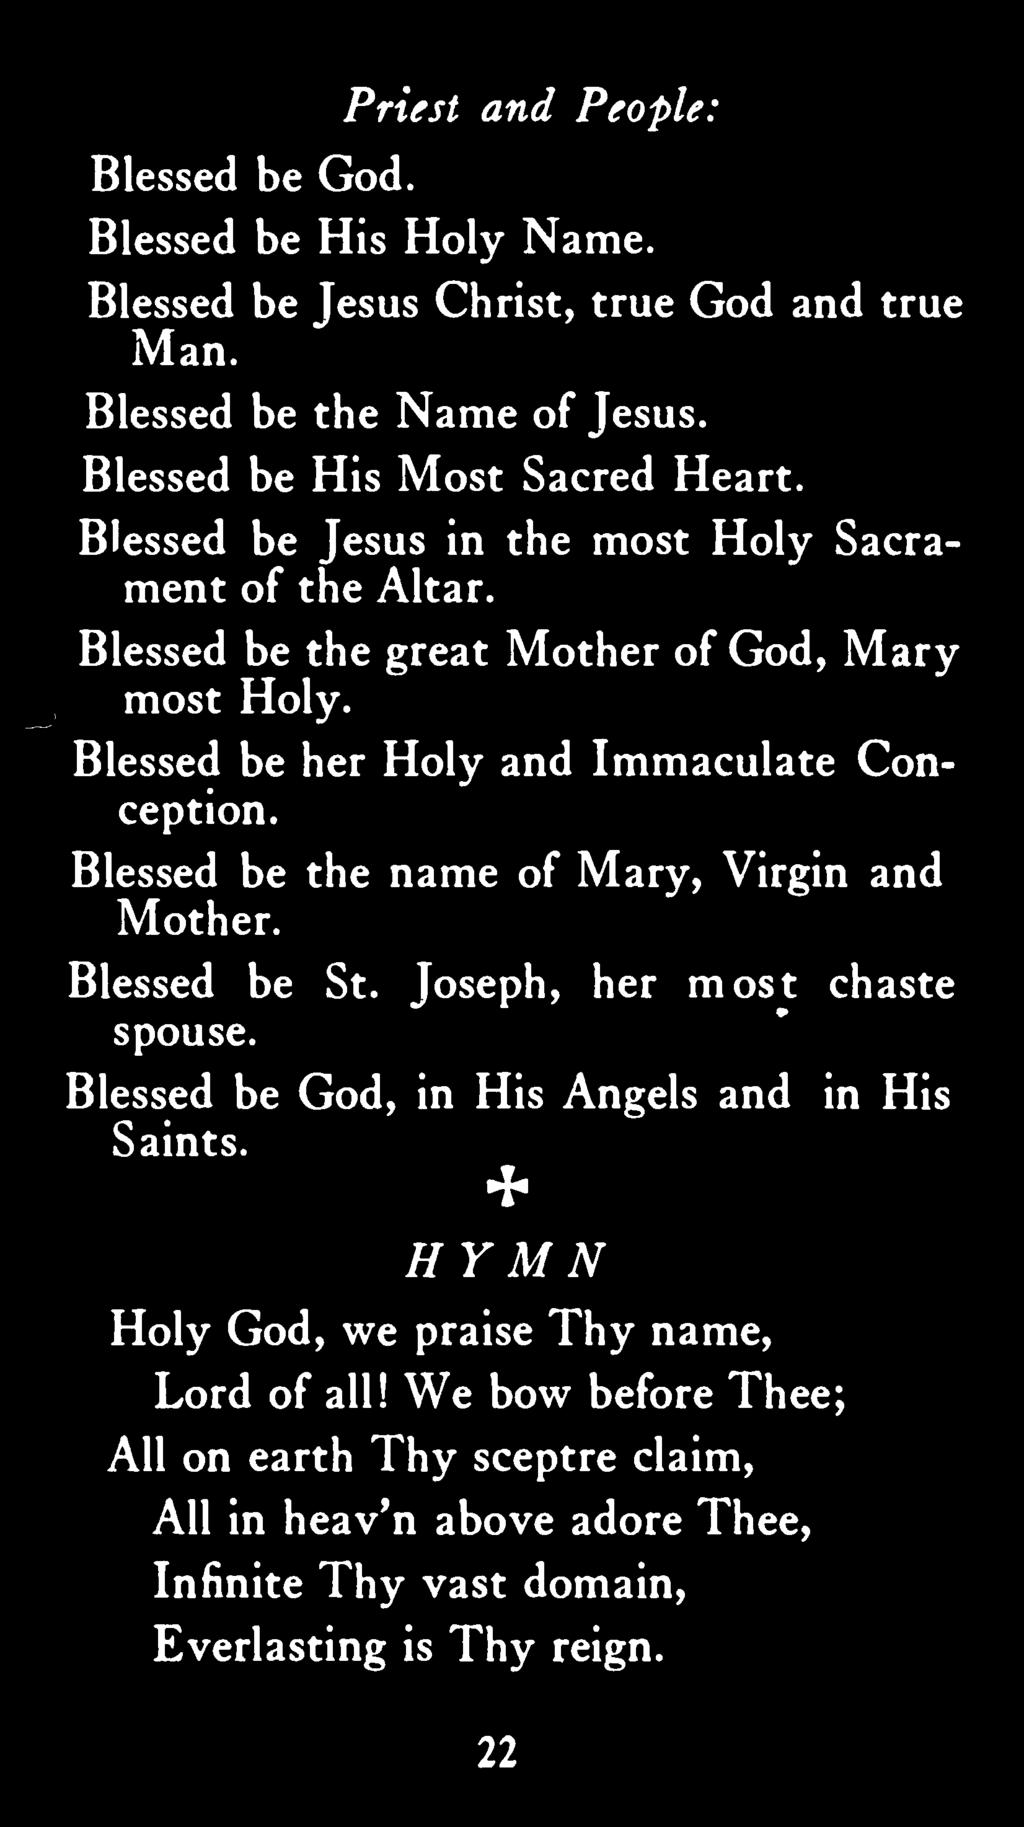 Blessed be her Holy and Immaculate Conception. Blessed be the name of Mary, Virgin and Mother. Blessed be St. Joseph, her most chaste spouse.